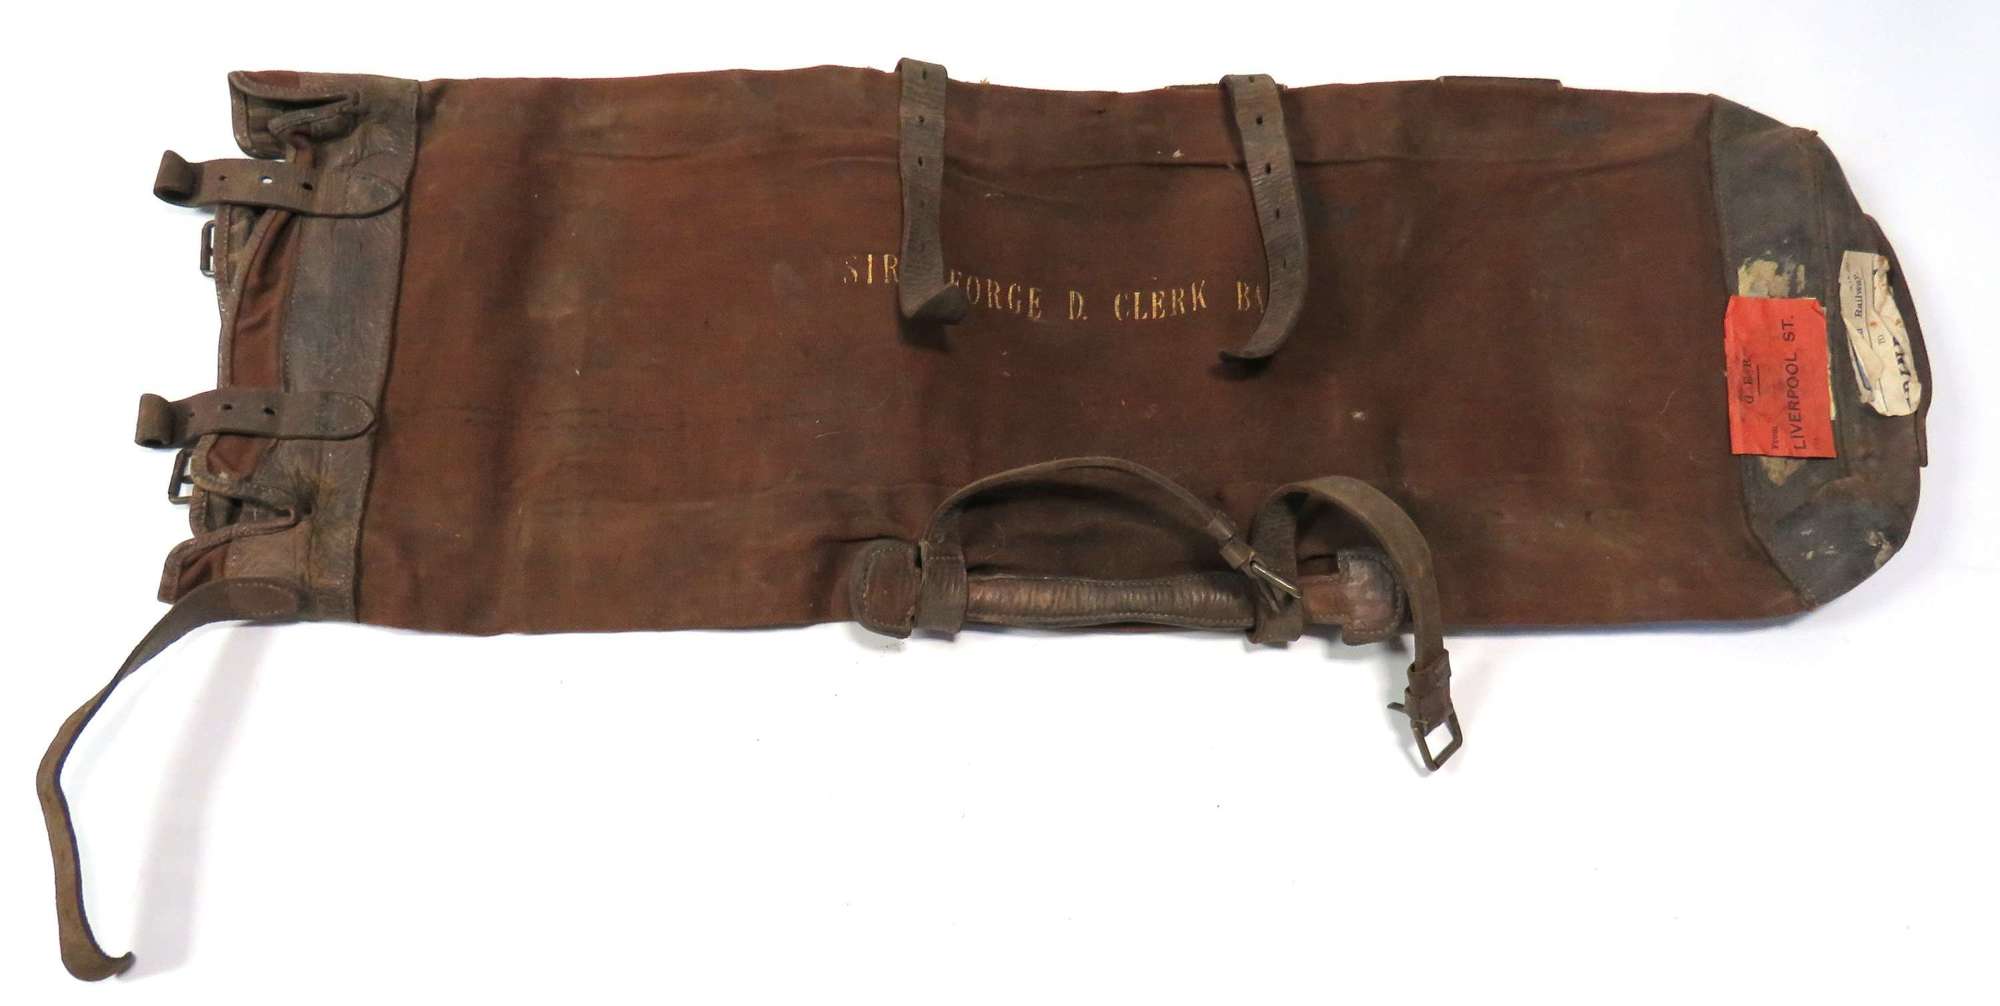 Late 19th Century Canvas Traveling Bag for Over a Gun Case. Attributed